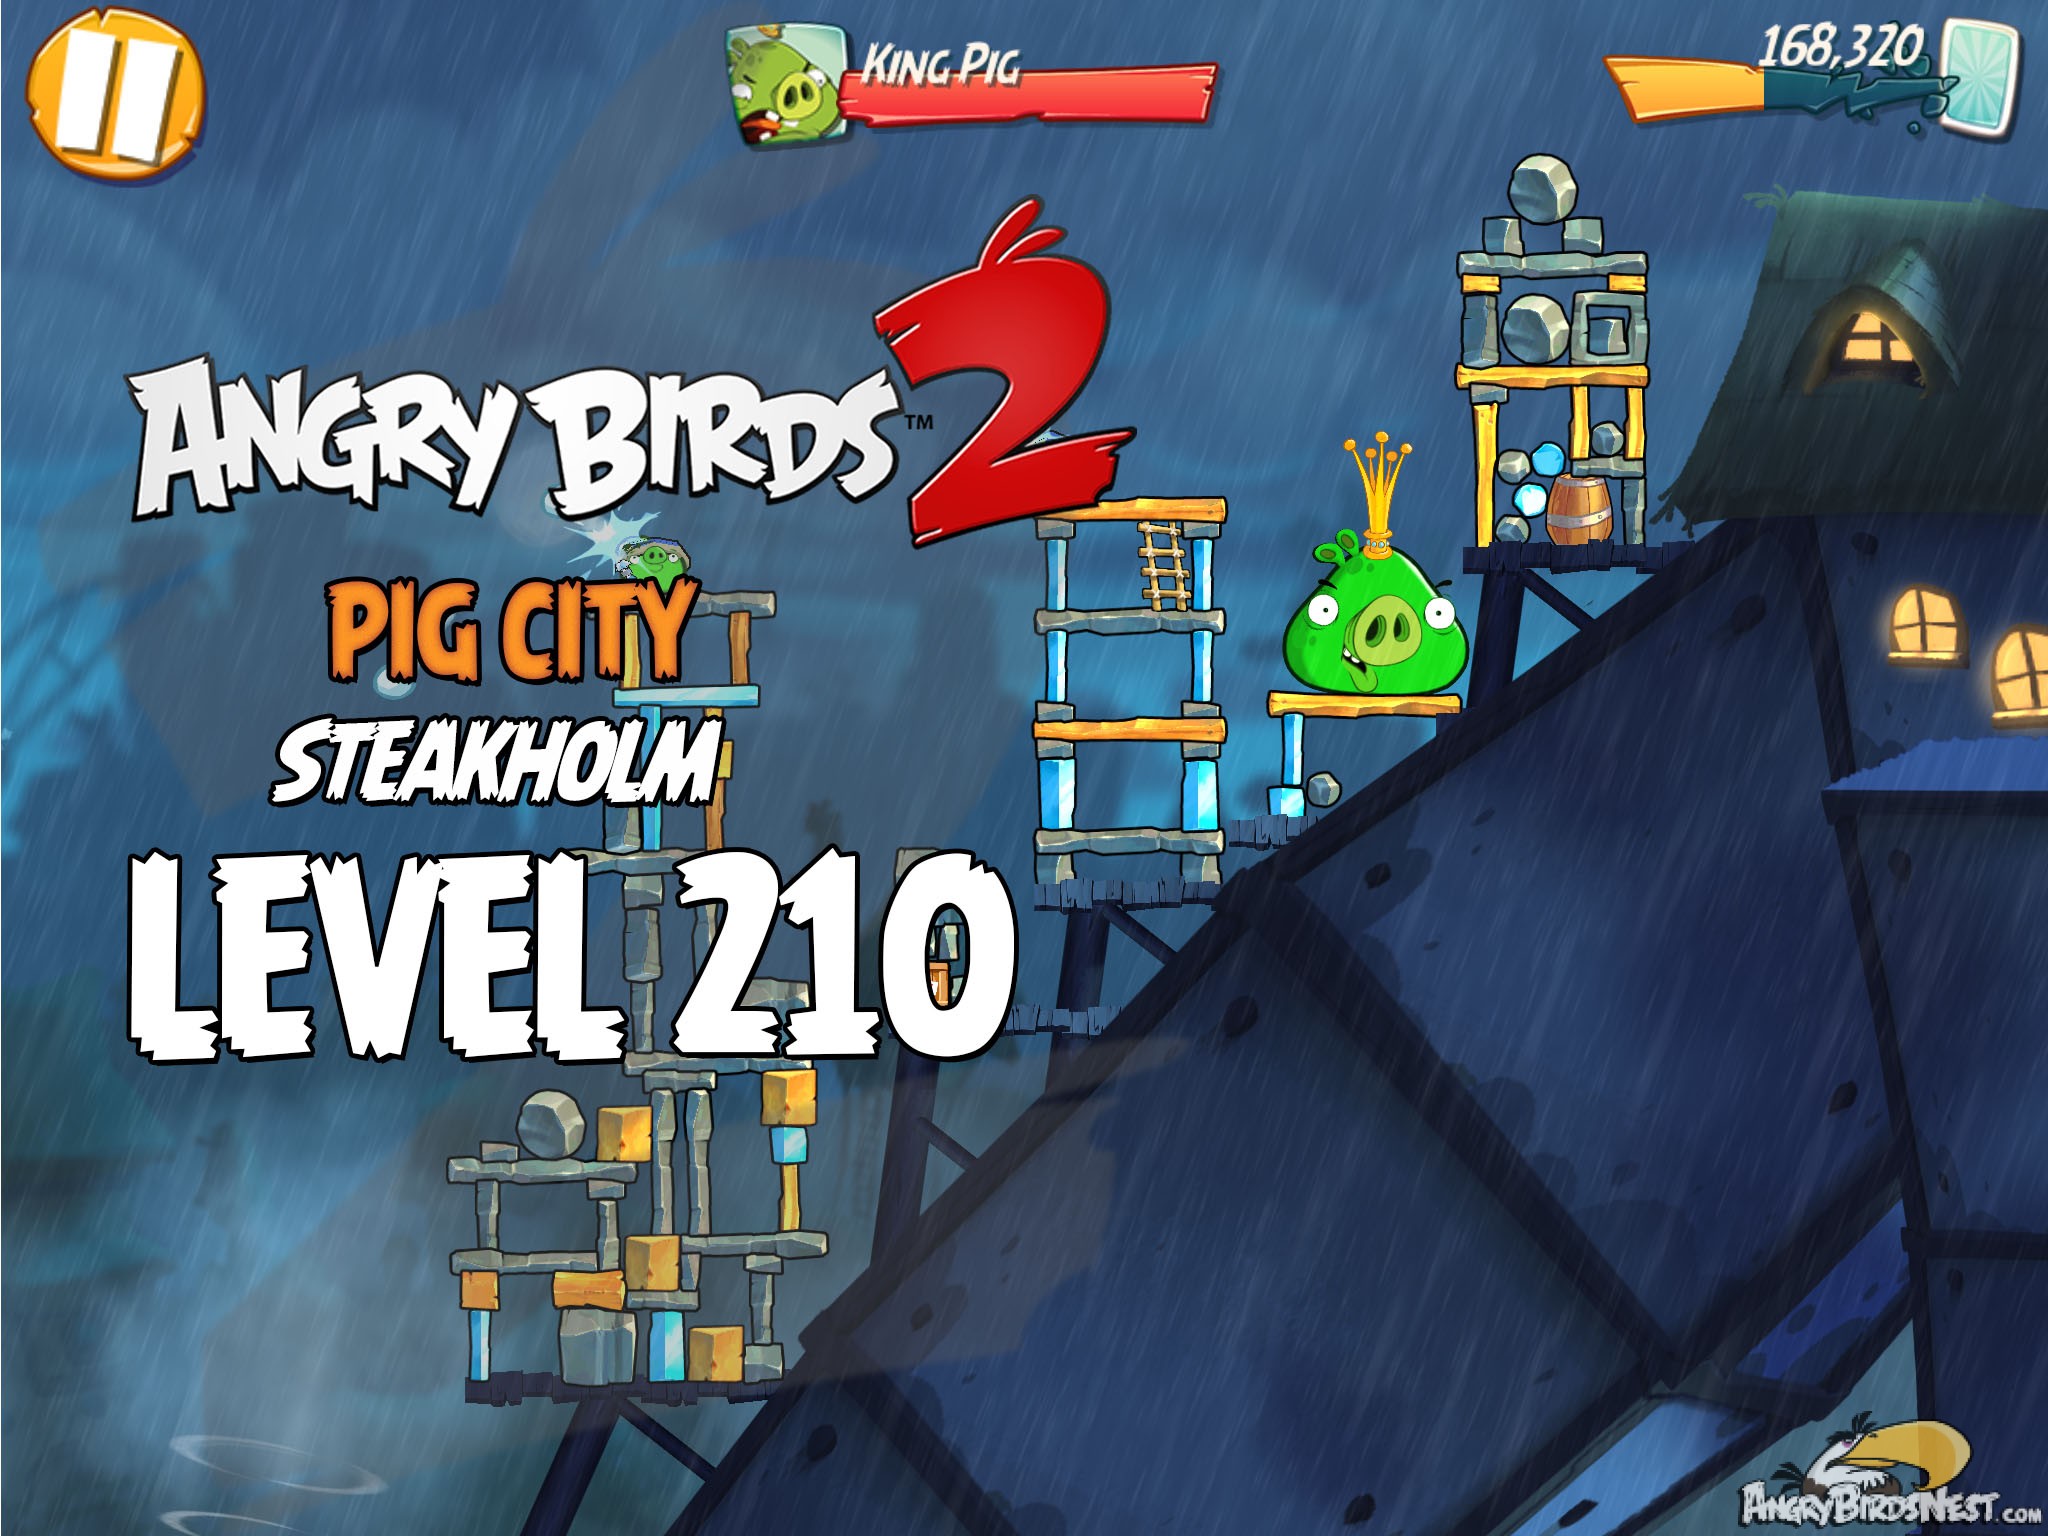 Angry Birds 2 Pig City Steakholm Level 210